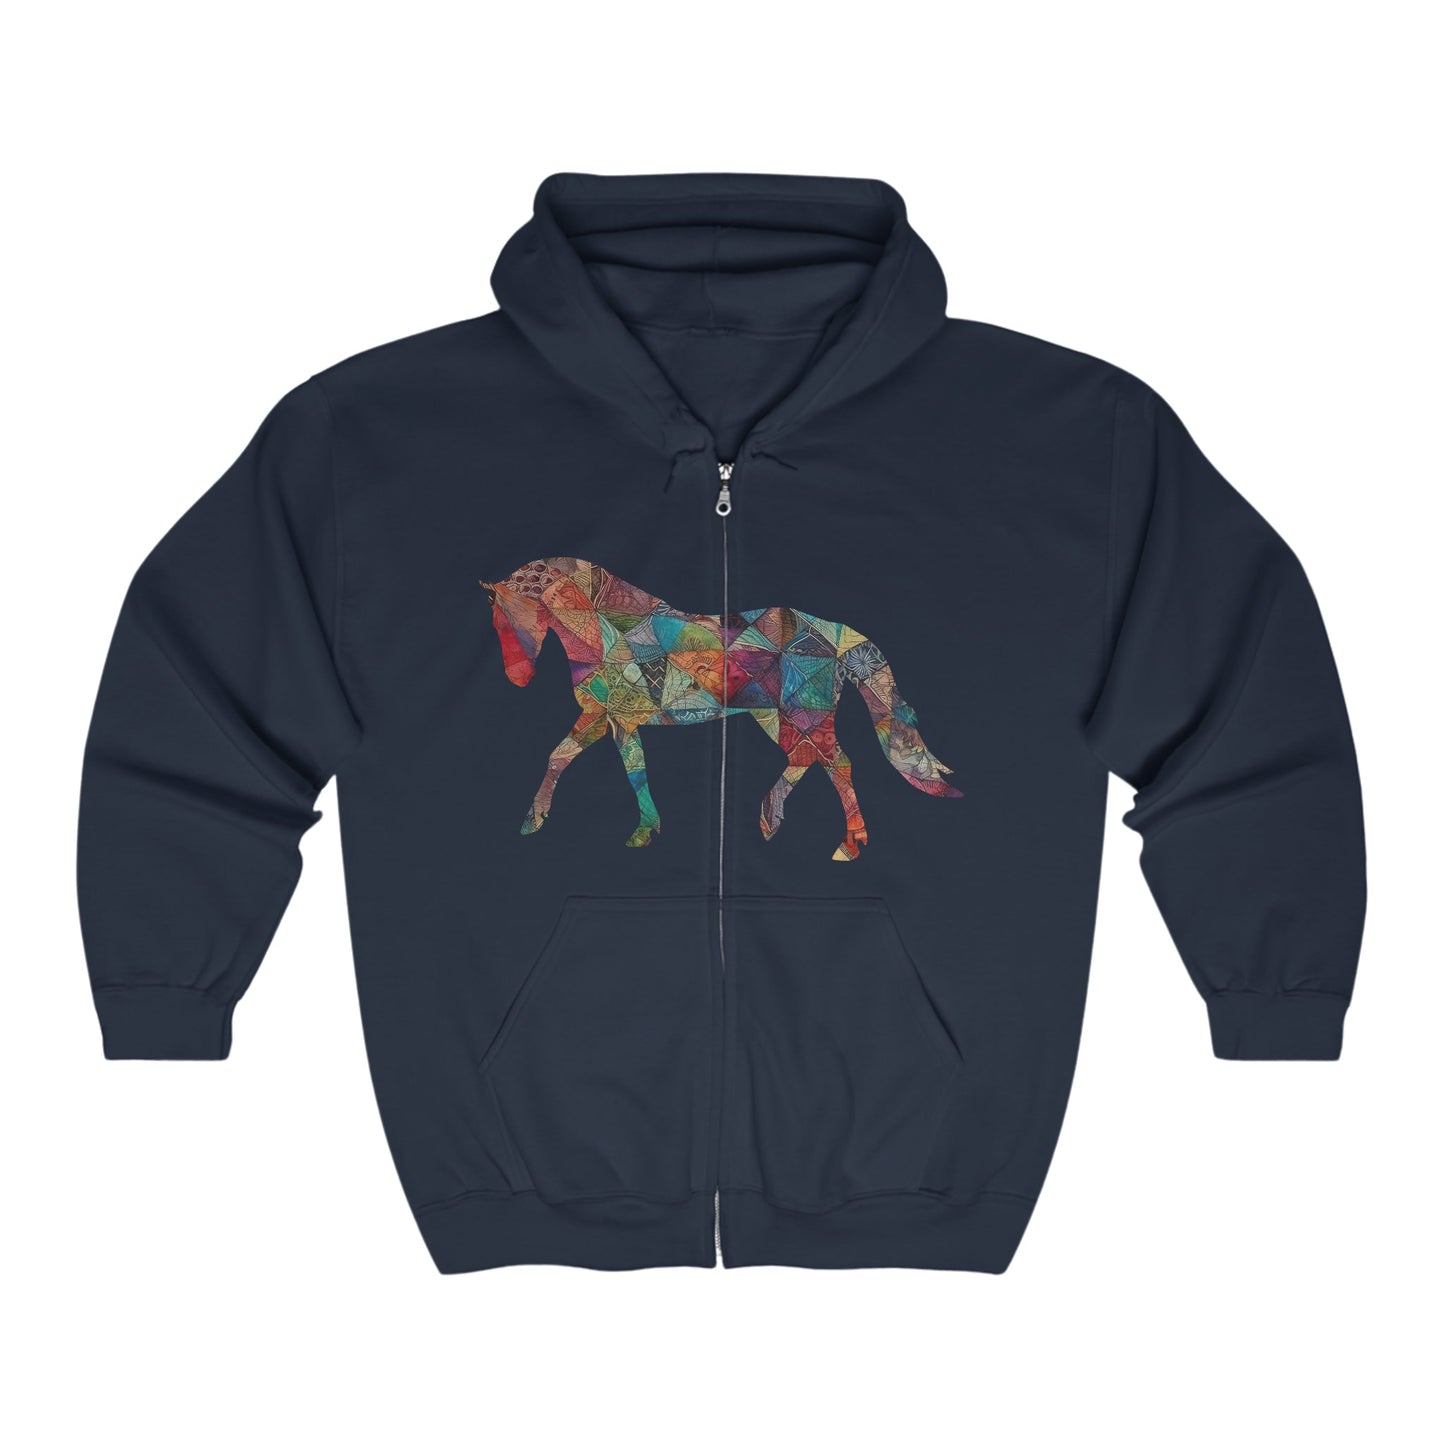 Colorful Horse Hoodie, Wild and Free Equestrian Tee, Magical Dream Horse, Muted Colors, Dreamy Artistic Design, Endless Possibility - FlooredByArt